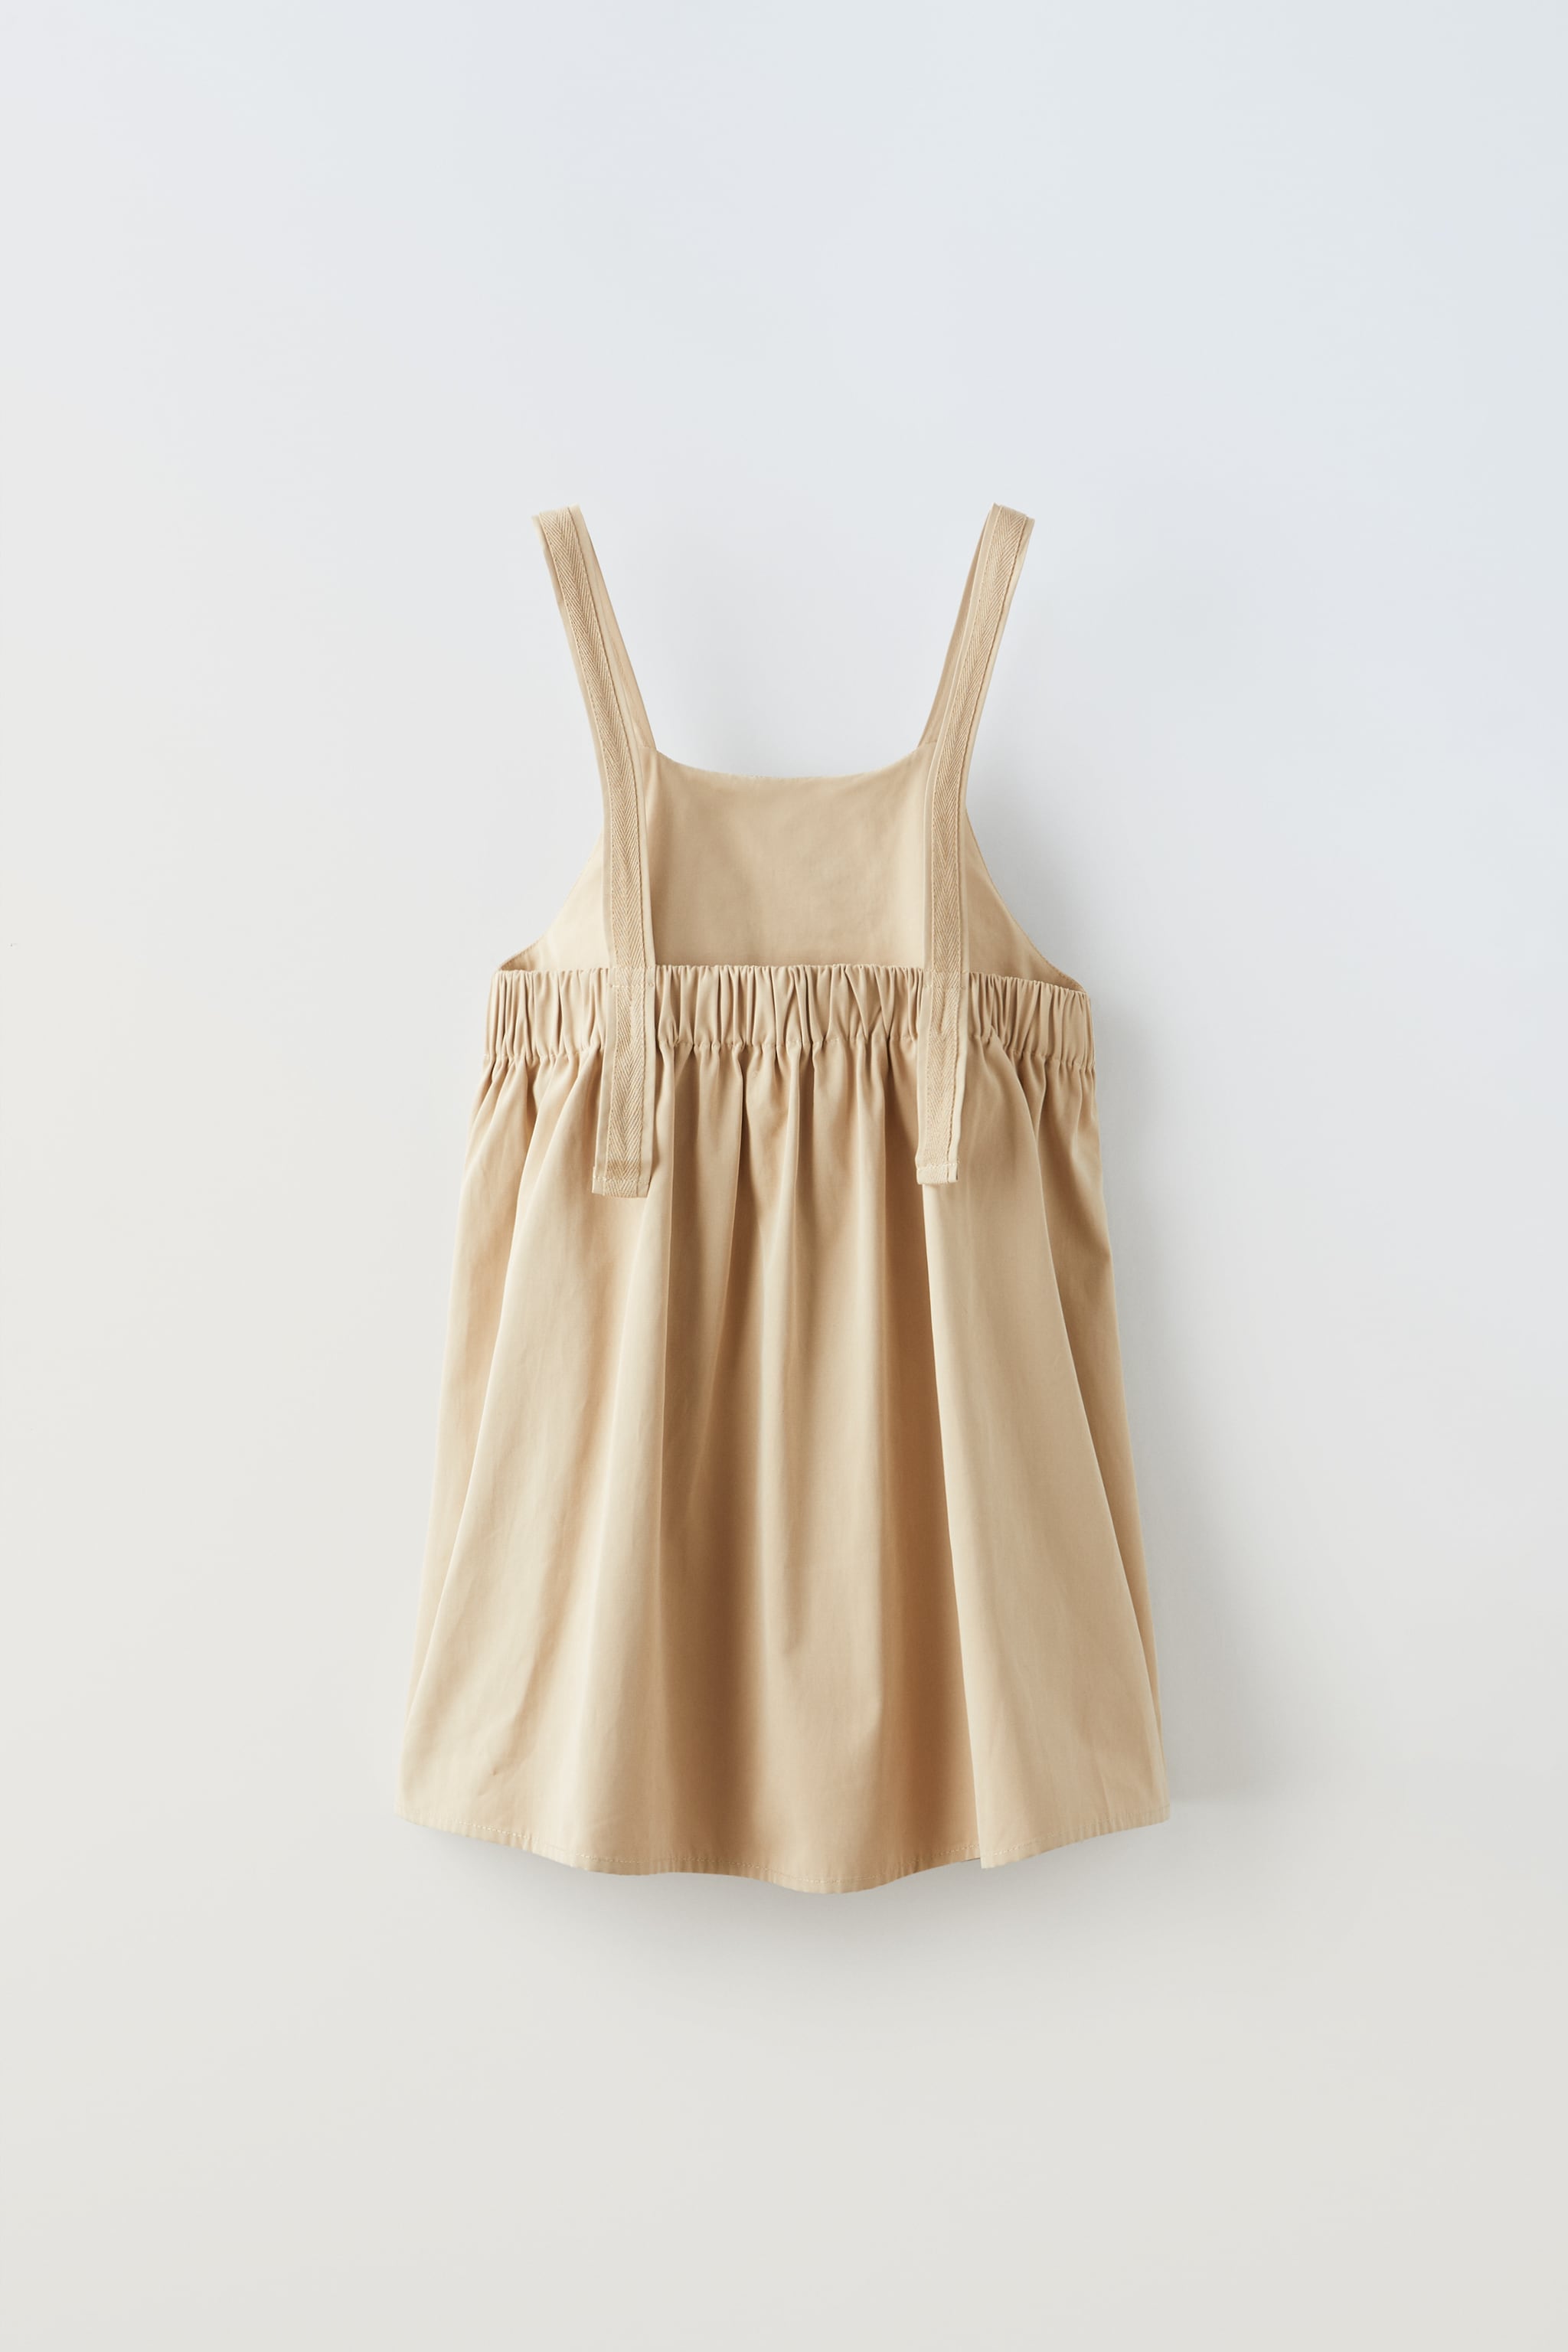 PANEL PLEATED PINAFORE DRESS